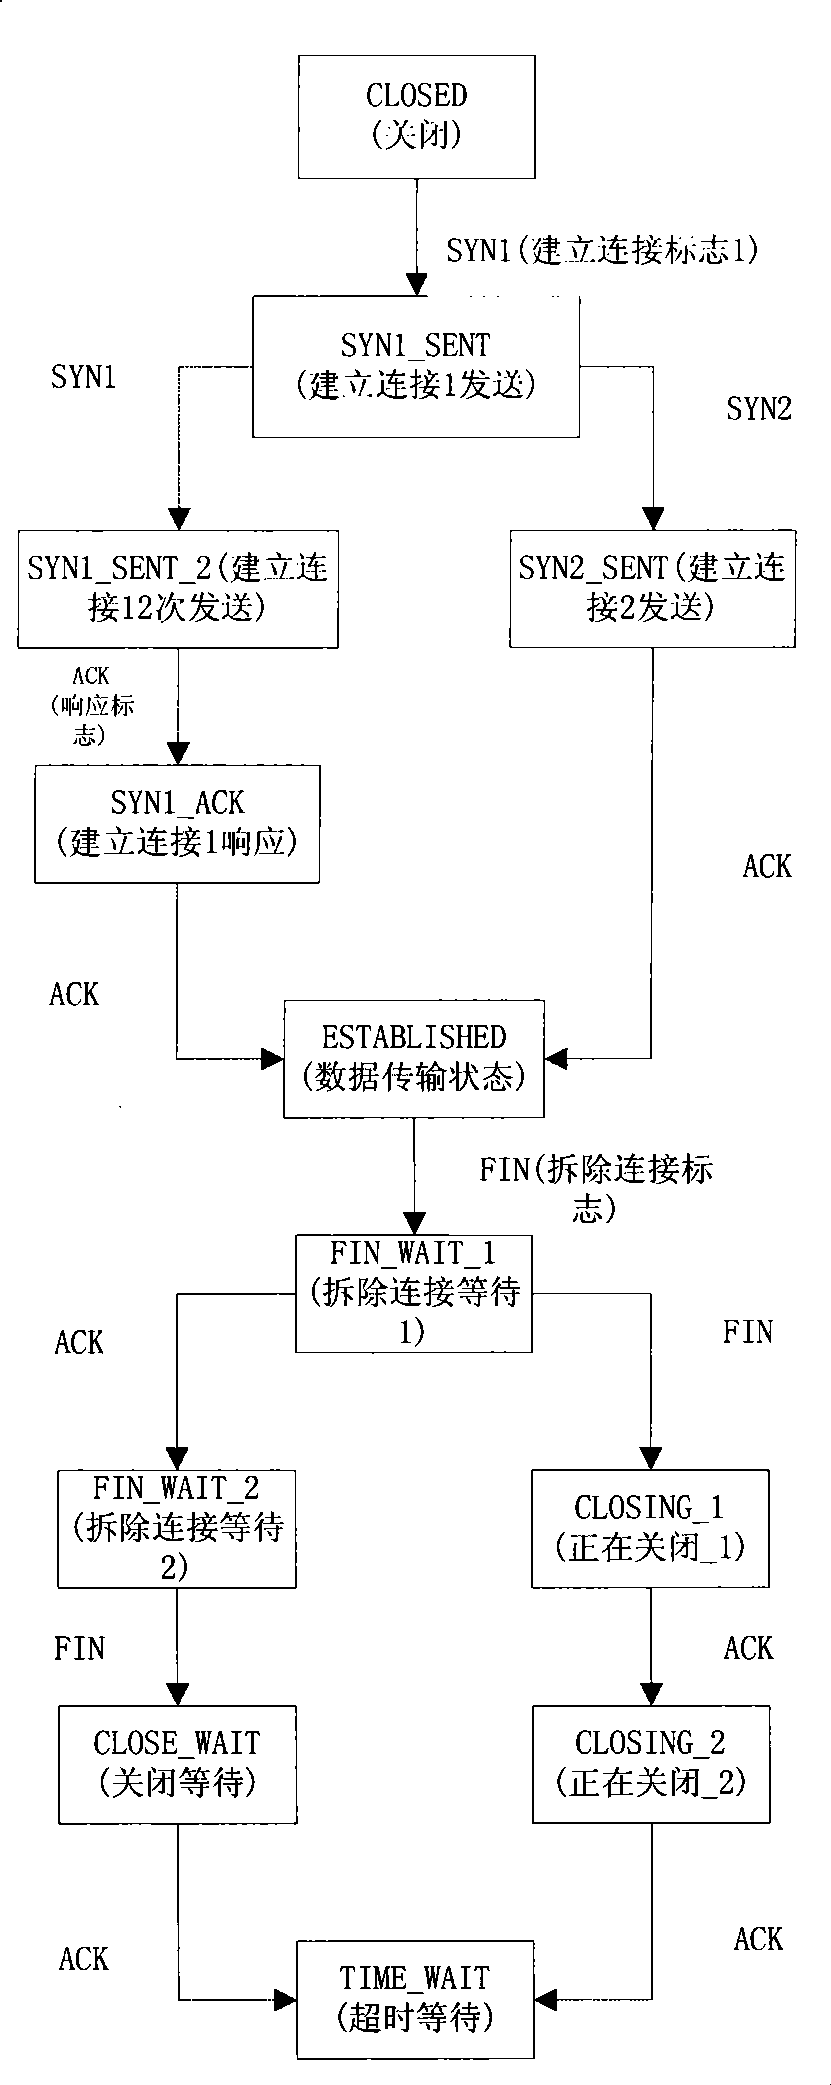 TCP connection managing method for internet bypass monitoring system